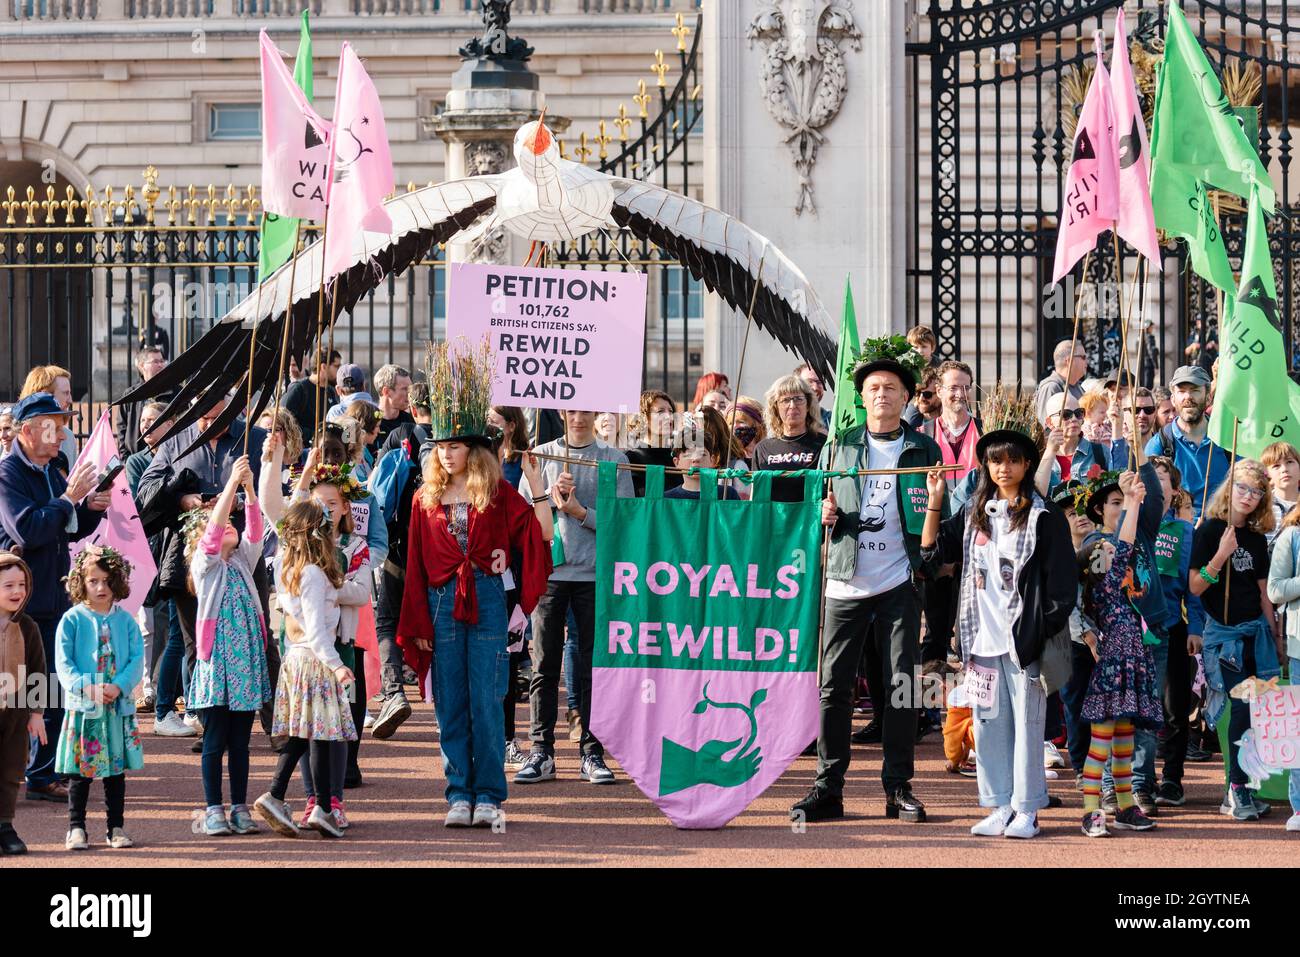 London, UK. 9 October 2021. Protestors joined by Chris Packham march to Buckingham Palace to call for the Royal Family to rewild their land Stock Photo